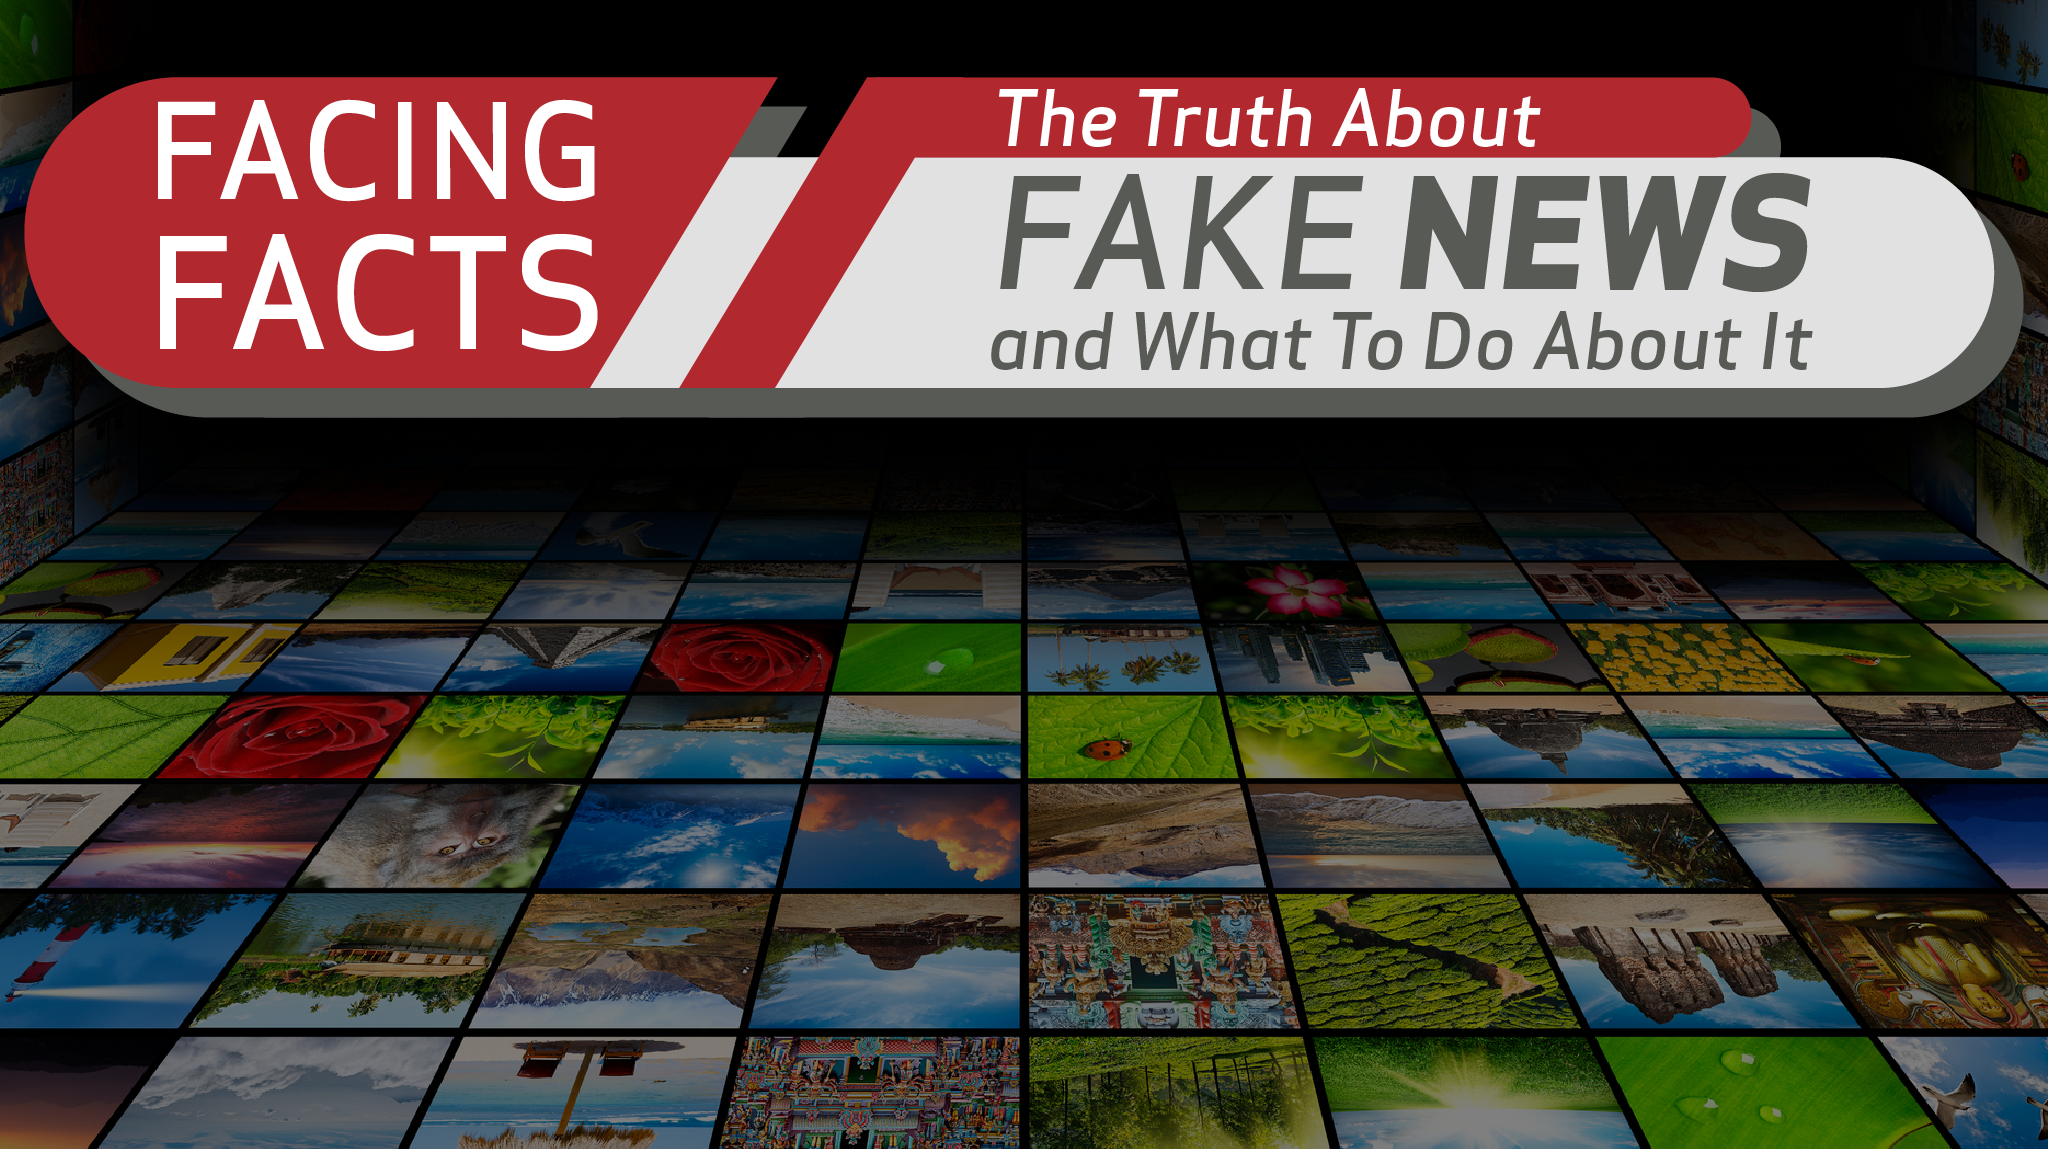 Facing Facts: The Truth About Fake News and What To Do About It